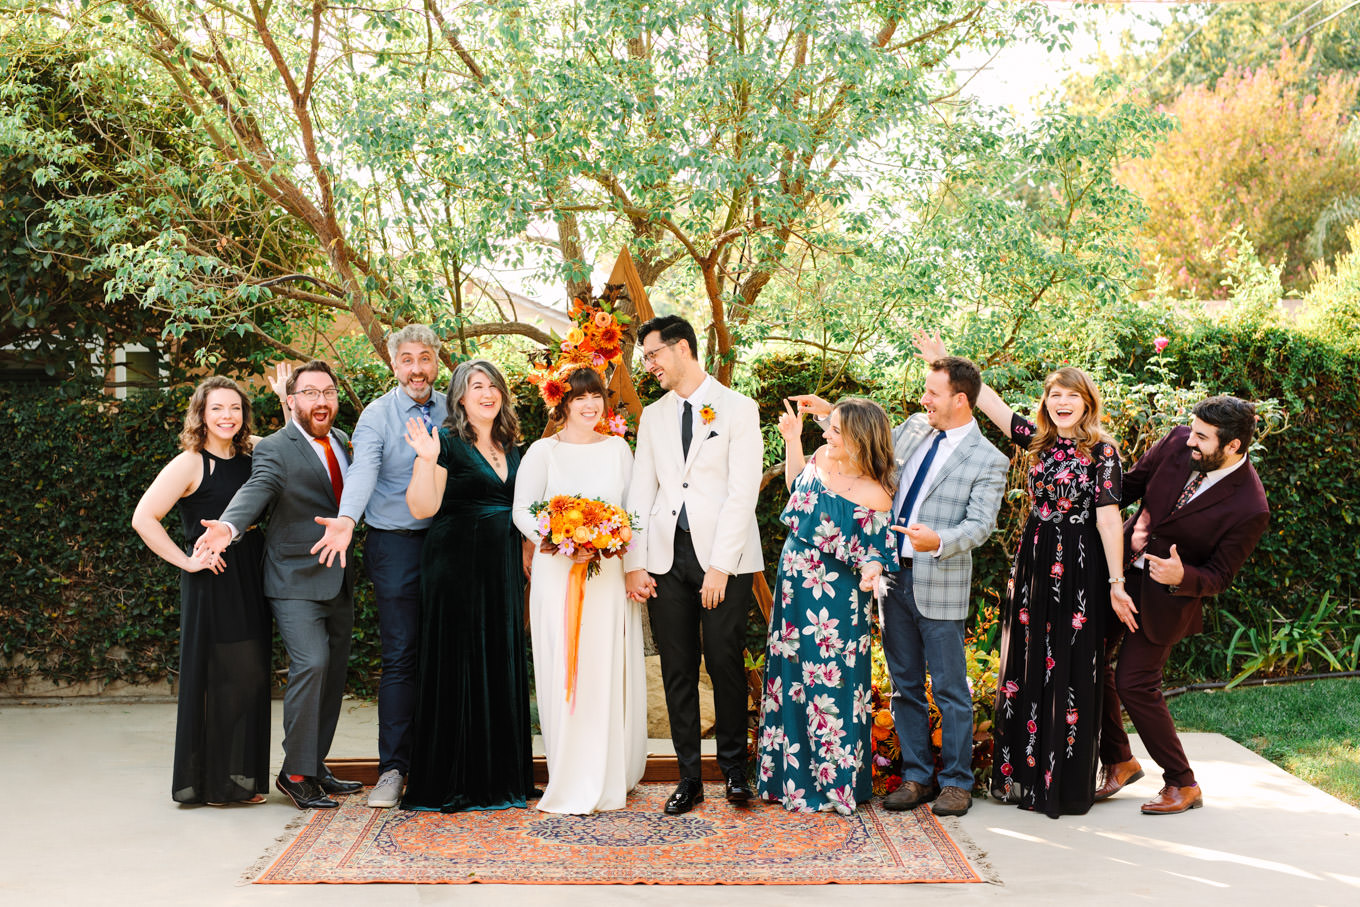 Guests at backyard autumn micro wedding with colorful triangle arch | Engagement, elopement, and wedding photography roundup of Mary Costa’s favorite images from 2020 | Colorful and elevated photography for fun-loving couples in Southern California | #2020wedding #elopement #weddingphoto #weddingphotography #microwedding   Source: Mary Costa Photography | Los Angeles